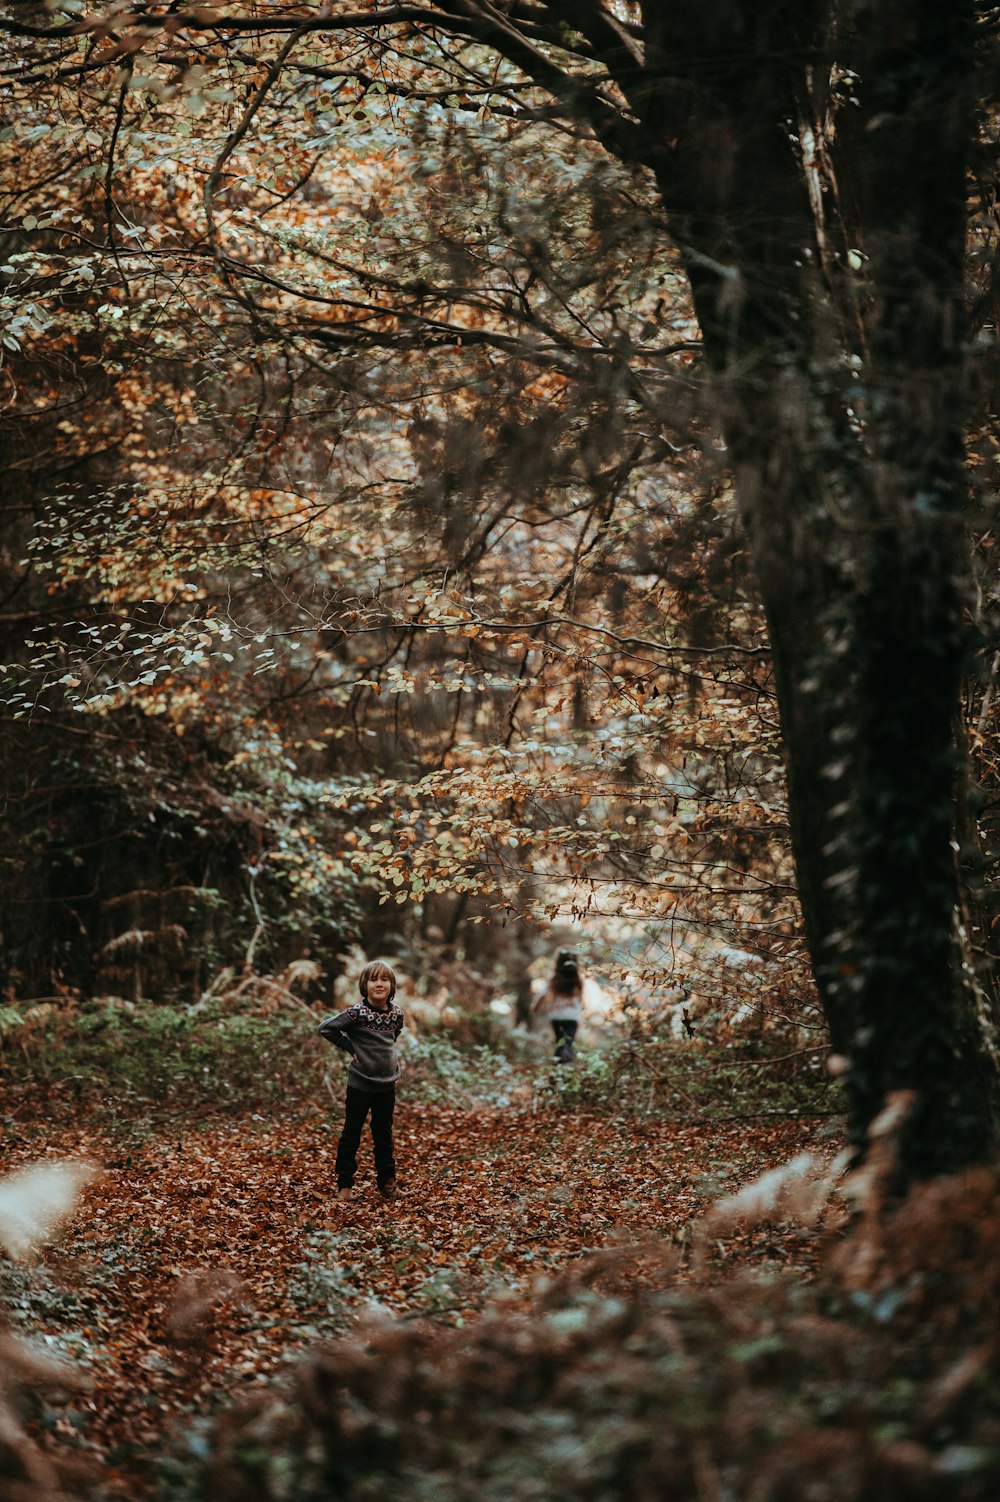 two kids standing in forest with fallen leaves